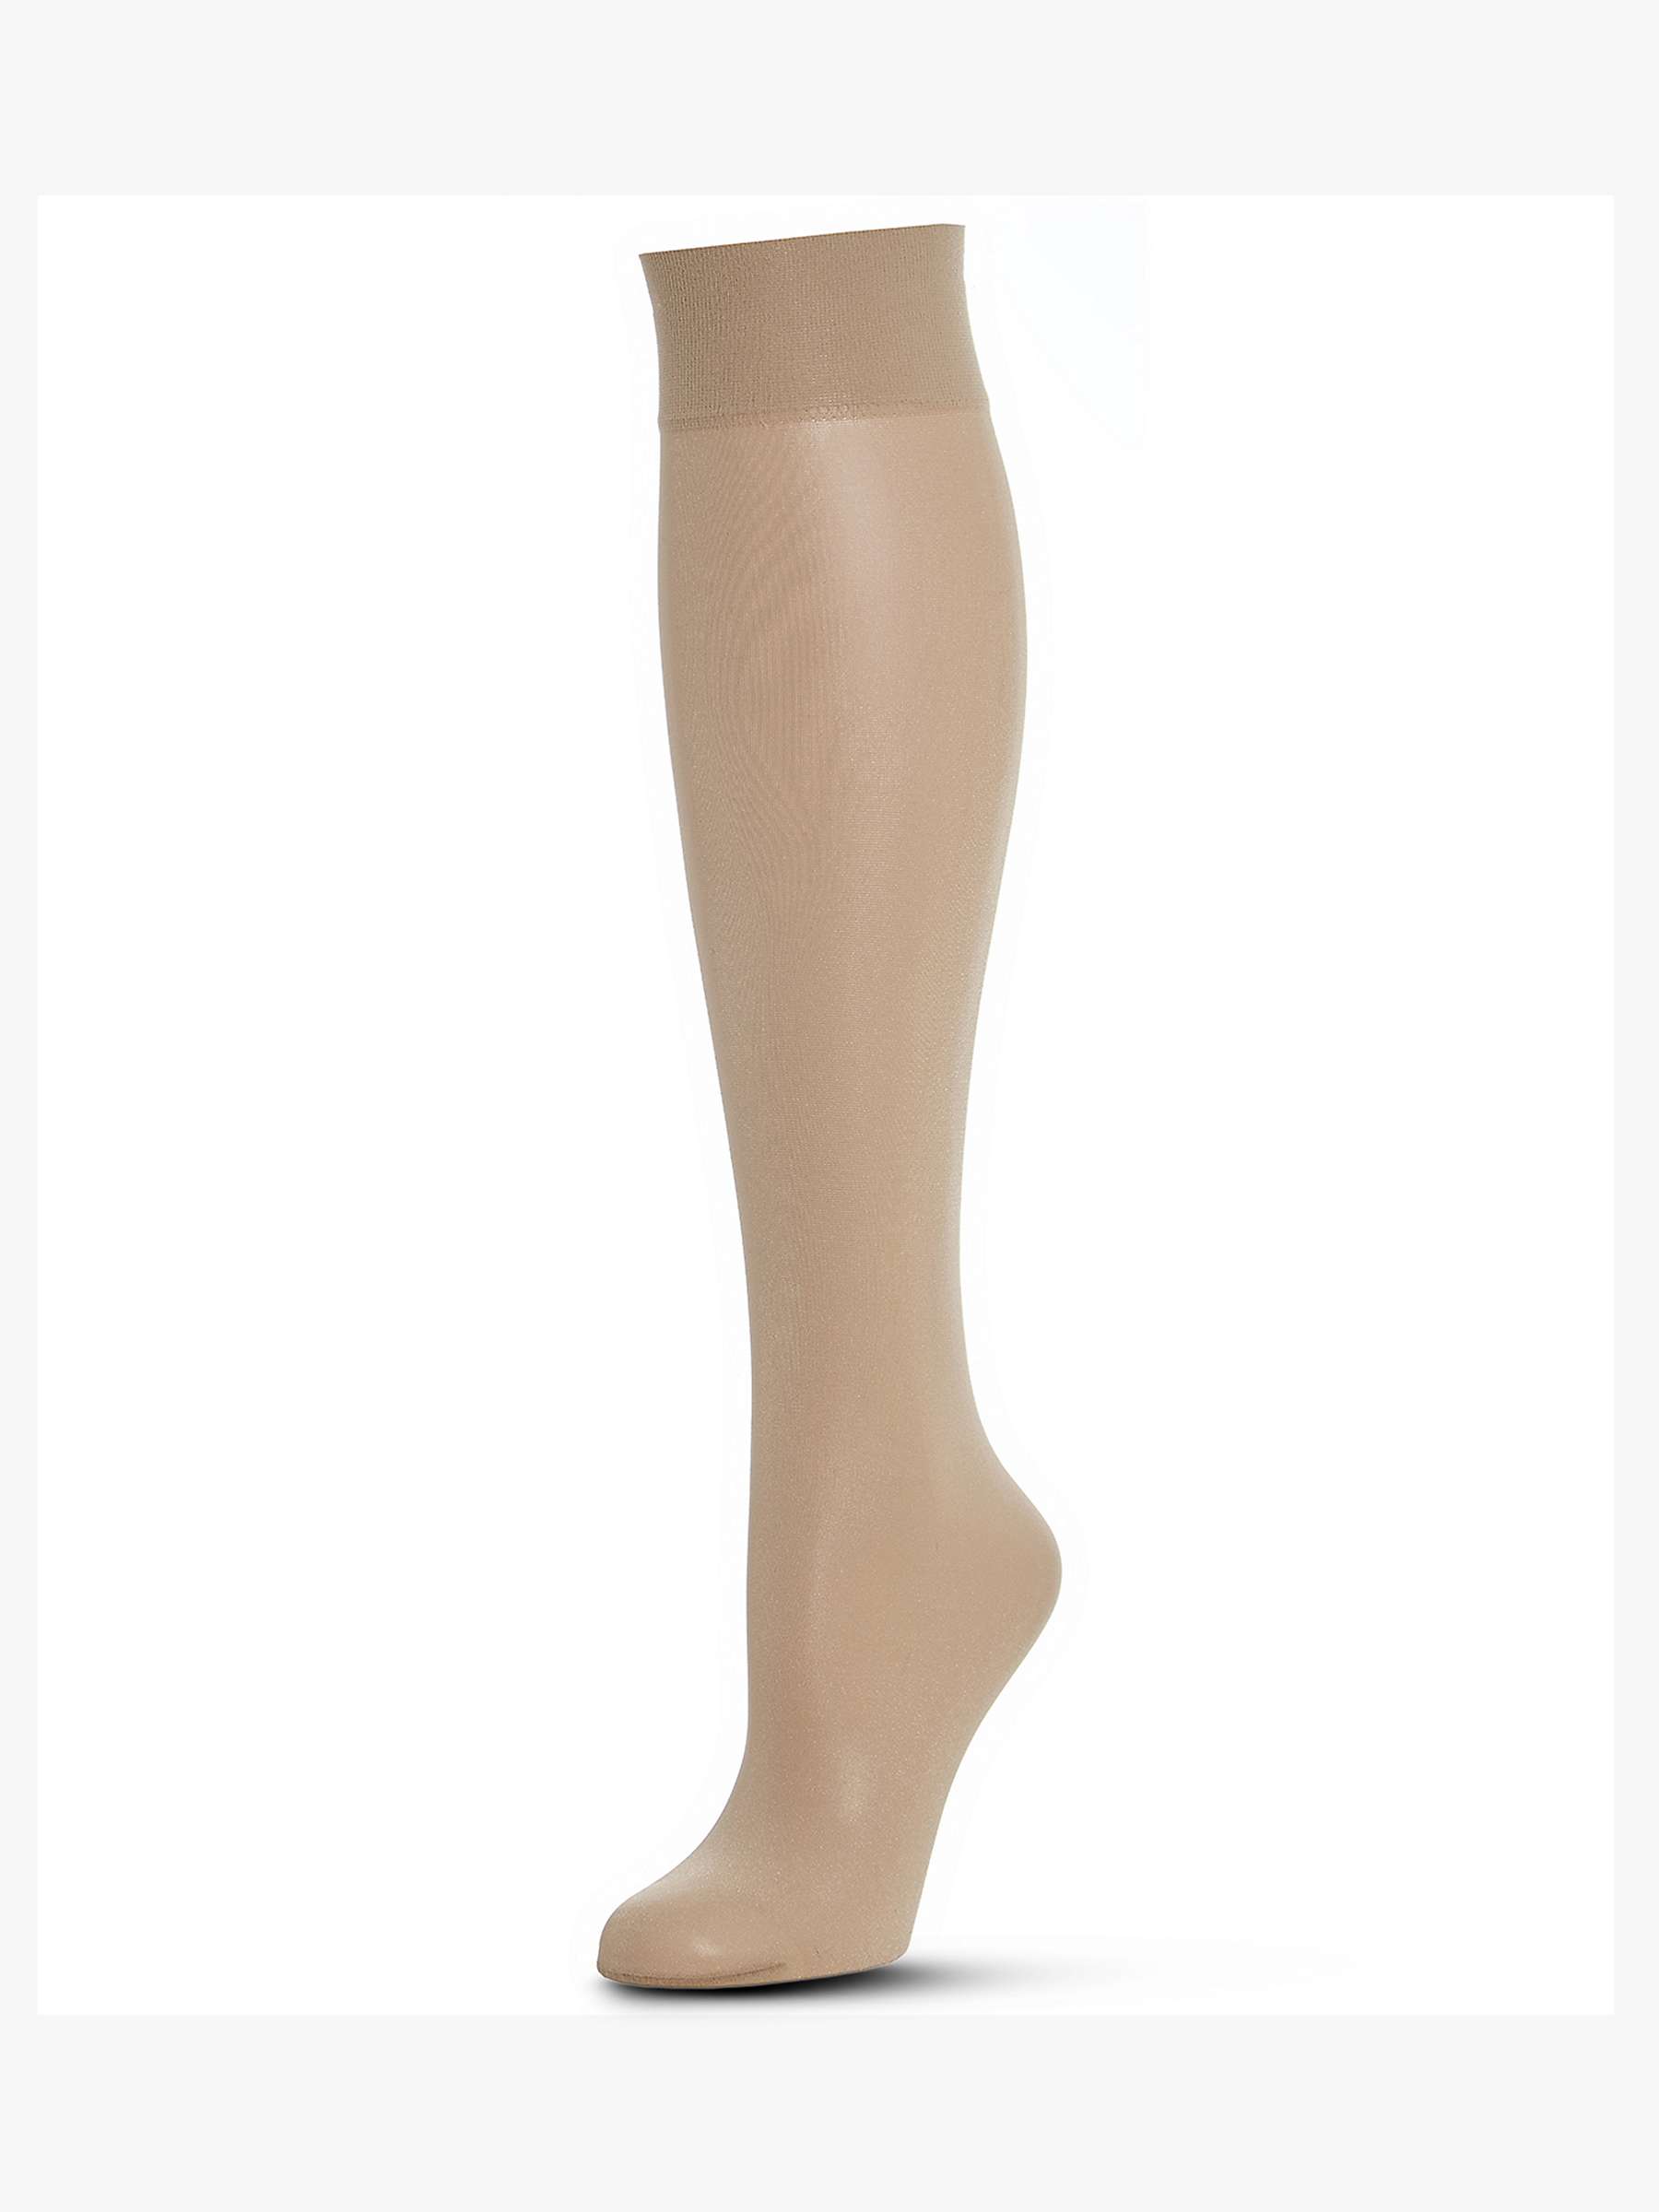 Buy Wolford 20 Denier Satin Touch Knee High Socks, Cosmetic Online at johnlewis.com